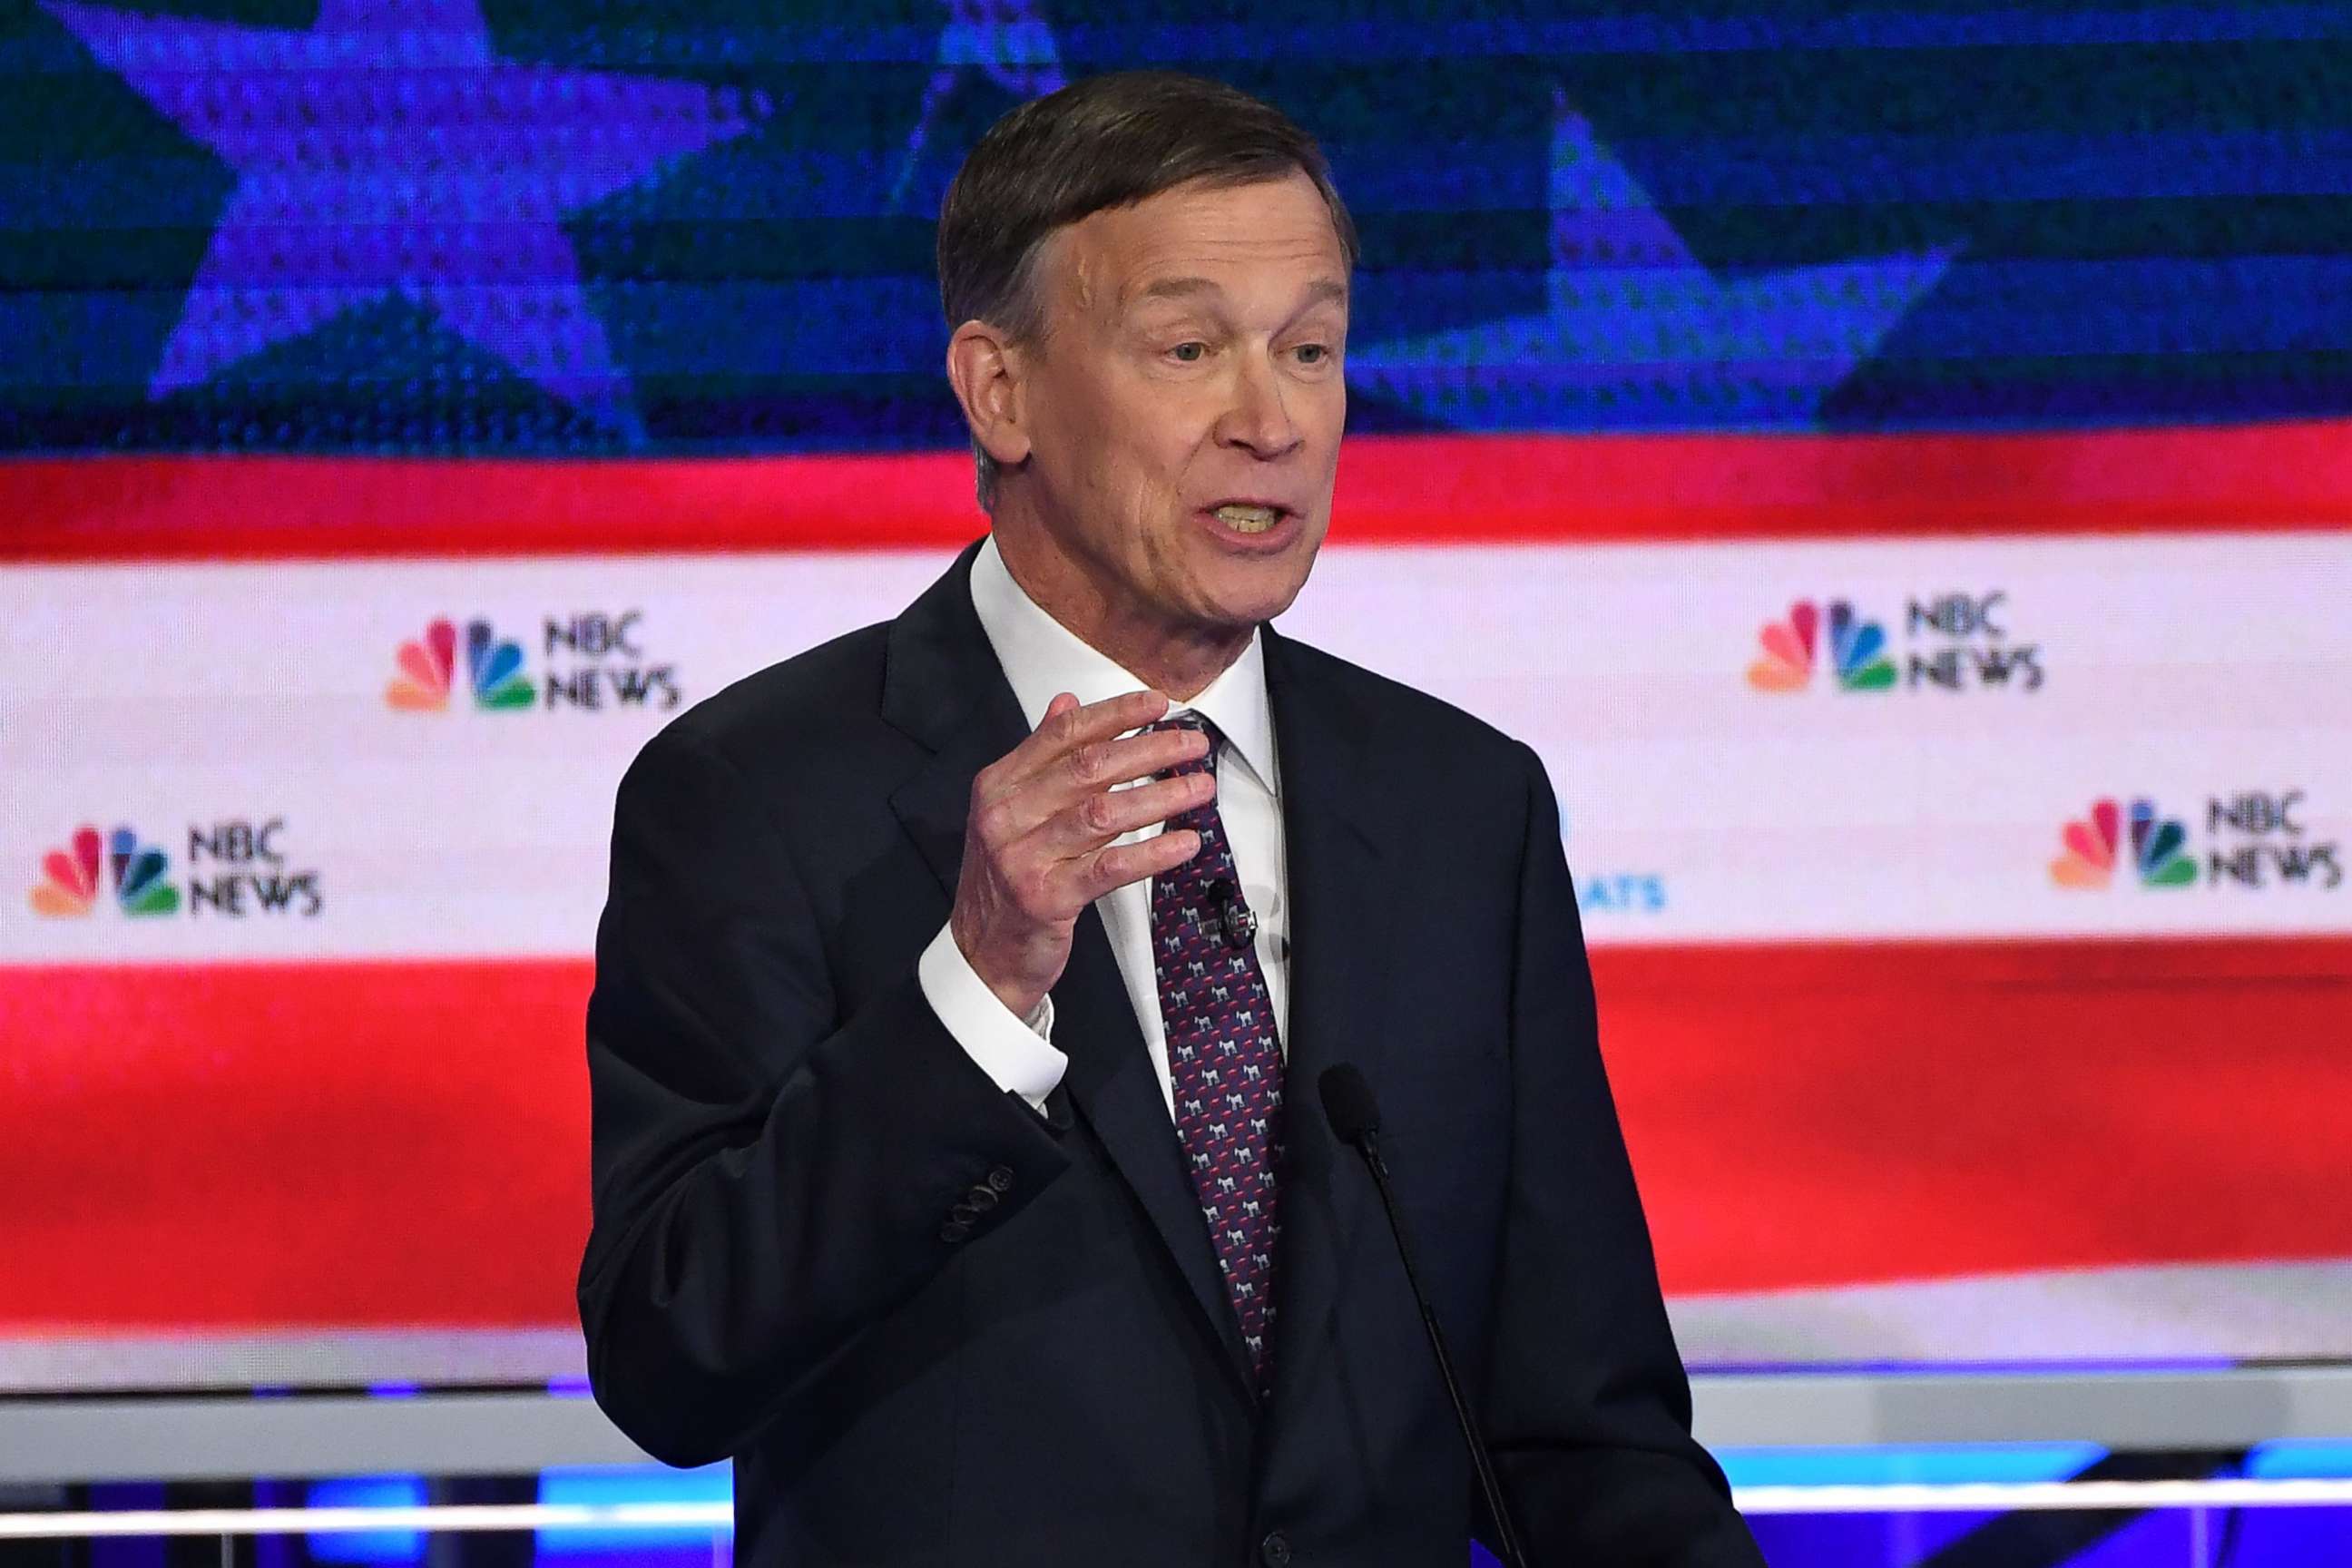 PHOTO: John Hickenlooper participates in the second night of the first 2020 democratic presidential debate at the Adrienne Arsht Center for the Performing Arts in Miami, June 27, 2019.